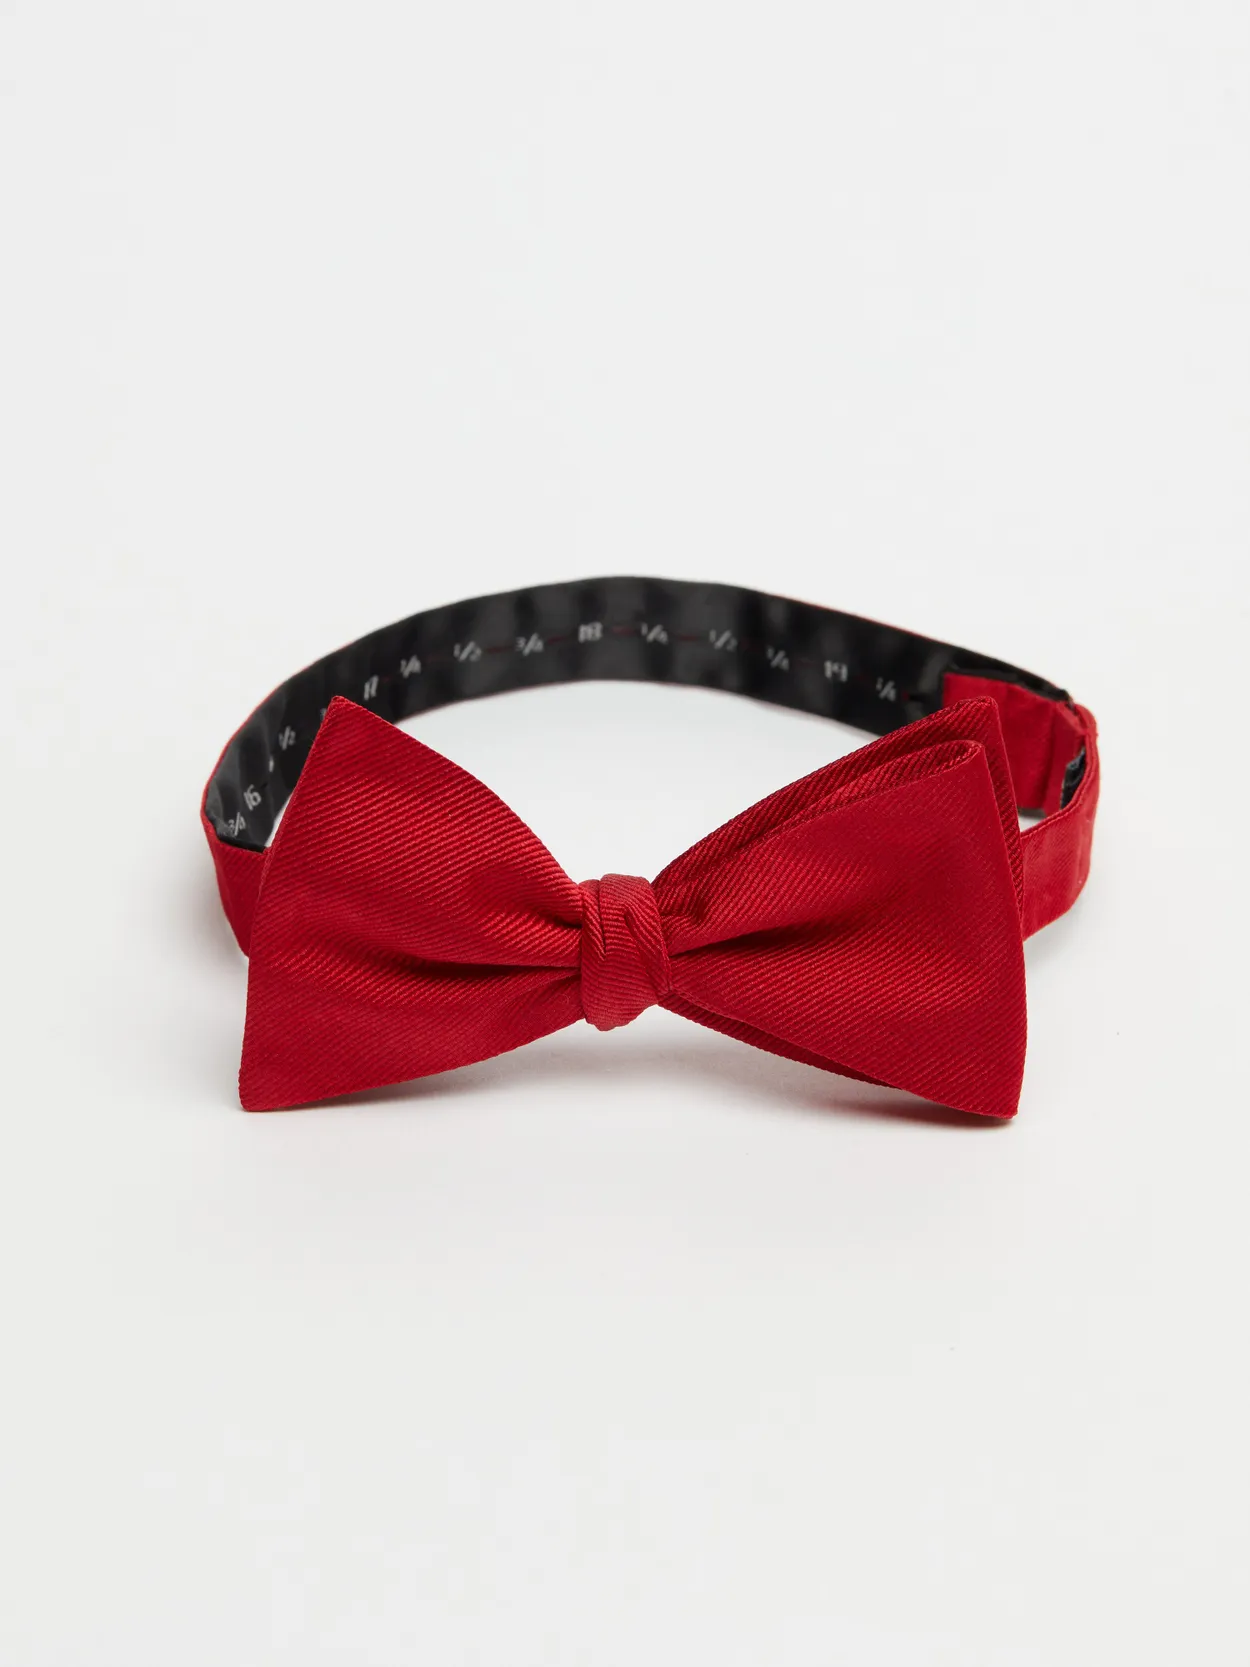 Red Bow Tie Plain